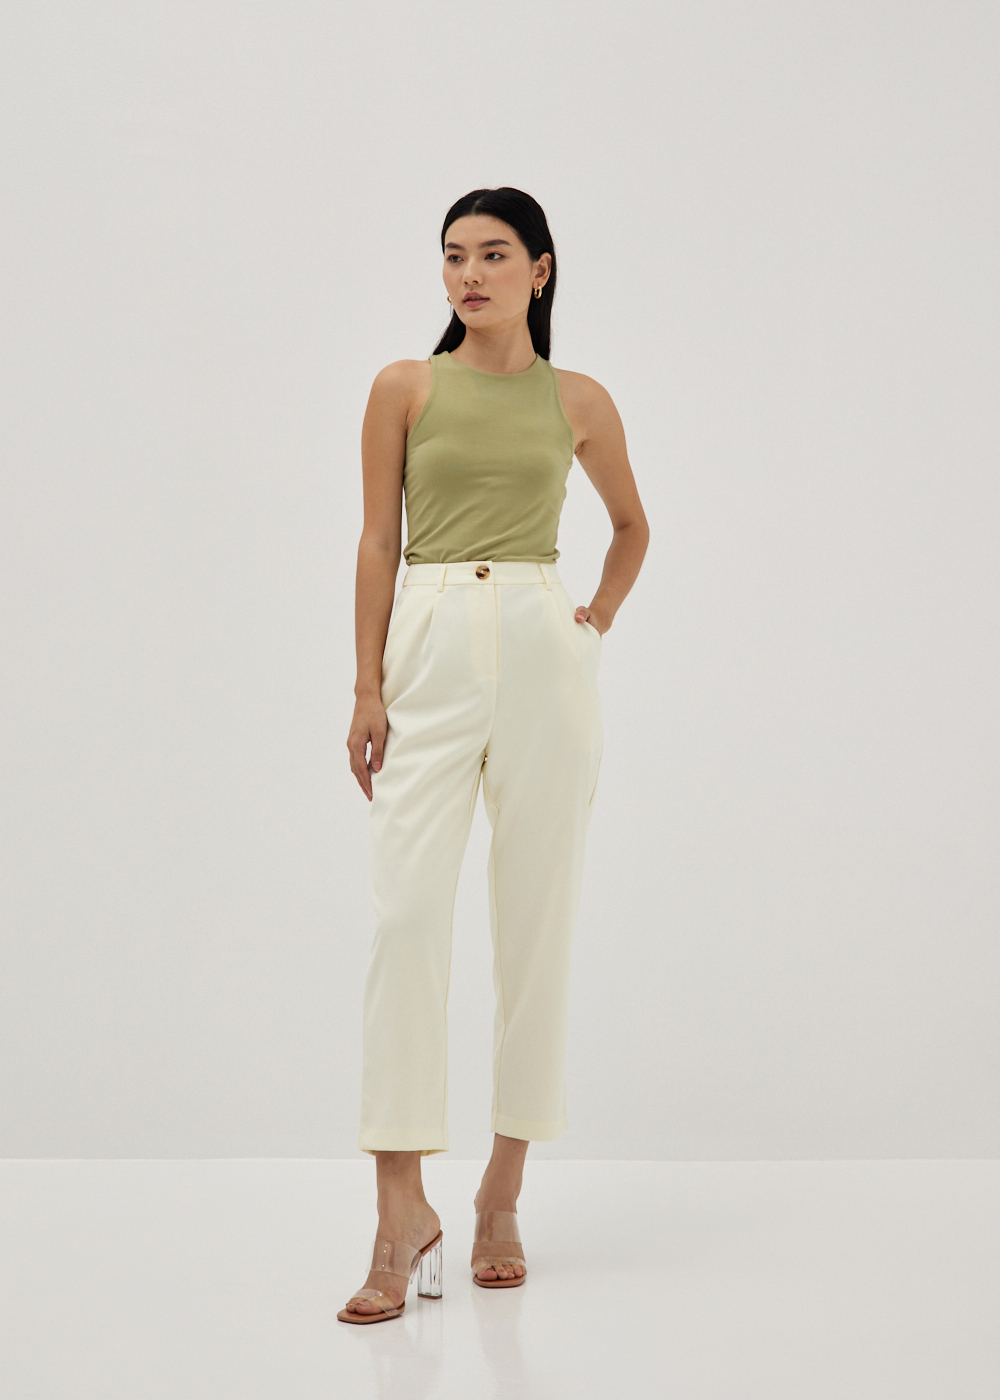 OUTFIT POST - DAY - WIDE LEG CREAM TROUSERS — ANGIE SMITH STYLE